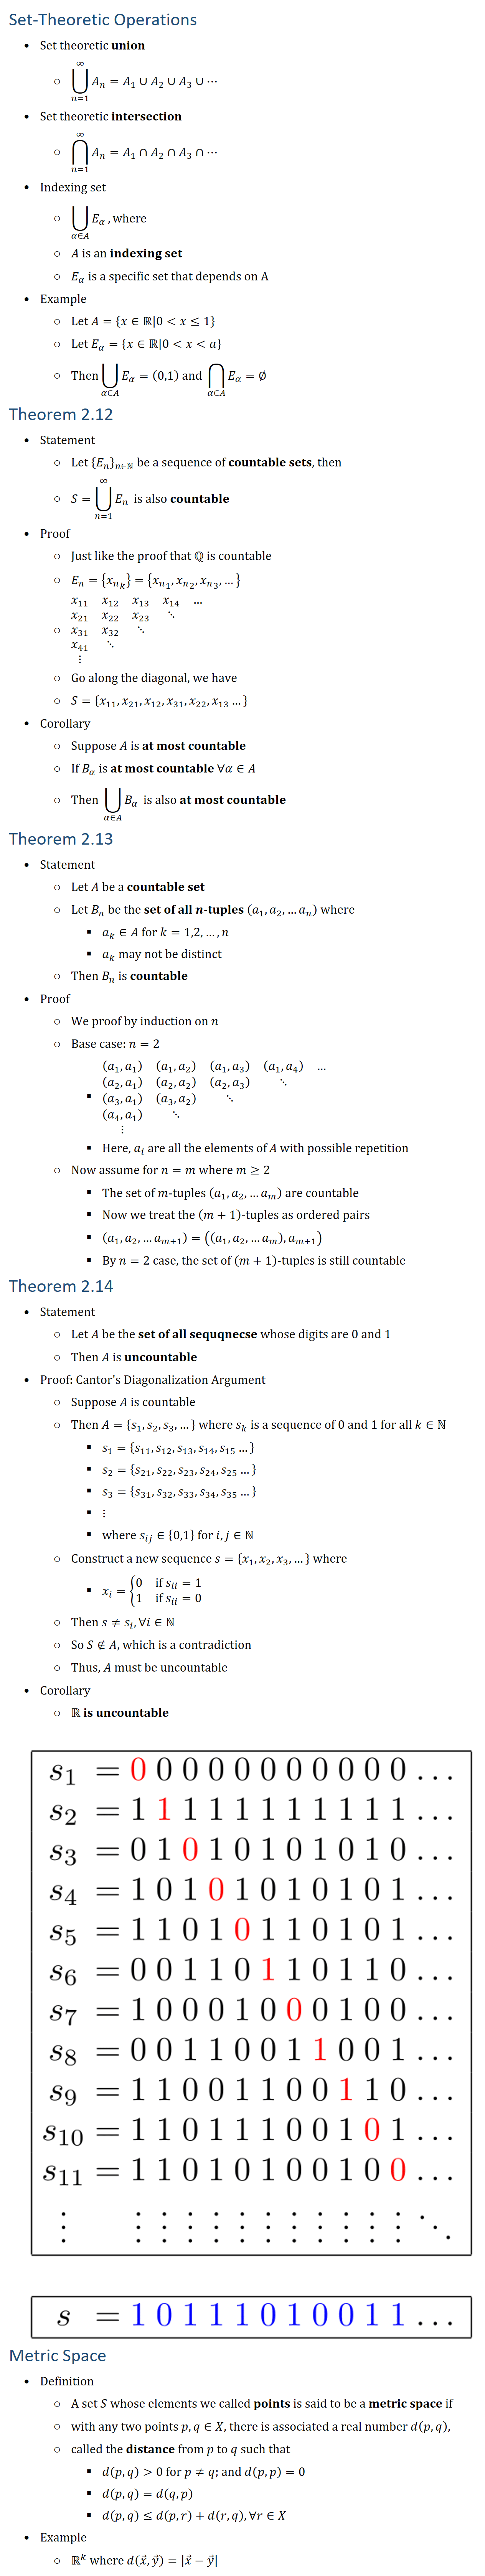 Set-Theoretic Operations • Set theoretic union ○ ⋃24_(n=1)^∞▒A_n =A_1∪A_2∪A_3∪⋯ • Set theoretic intersection ○ ⋂24_(n=1)^∞▒A_n =A_1∩A_2∩A_3∩⋯ • Indexing set ○ ⋃8_(α∈A)▒E_α , where ○ A is an indexing set ○ E_α is a specific set that depends on A • Example ○ Let A={x∈R0x≤1} ○ Let E_α={x∈R0xa} ○ Then⋃8_(α∈A)▒E_α =(0,1) and ⋂8_(α∈A)▒E_α =∅ Theorem 2.12 • Statement ○ Let {E_n }_(n∈N be a sequence of countable sets, then ○ S=⋃24_(n=1)^∞▒E_n is also countable • Proof ○ Just like the proof that Q is countable ○ E_n={〖x_n〗_k }={〖x_n〗_1,〖x_n〗_2,〖x_n〗_3,…} ○ ■(x_11&x_12&x_13&x_14&…&@x_21&x_22&x_23&⋱&&@x_31&x_32&⋱&&&@x_41&⋱&&&&@⋮&&&&&) ○ Go along the diagonal, we have ○ S={x_11,x_21,x_12,x_31,x_22,x_13…} • Corollary ○ Suppose A is at most countable ○ If for α∈A, B_α is at most countable, then ○ T=⋃8_(α∈A)▒B_α is also at most countable Theorem 2.13 • Statement ○ Let A be a countable set ○ Let B_n be the set of all n-tuples (a_1,a_2,…a_n ) where a_k∈A for 1≤k≤n ○ And a_k may not be distinct, then B_n is countable • Proof ○ We proof by induction on n ○ Base case: n=2 § ■((a_1,a_1 )&(a_1,a_2 )&(a_1,a_3 )&(a_1,a_4 )&…&@(a_2,a_1 )&(a_2,a_2 )&(a_2,a_3 )&⋱&&@(a_3,a_1 )&(a_3,a_2 )&⋱&&&@(a_4,a_1 )&⋱&&&&@⋮&&&&&) § Here a_i are all the elements of A with possible repetition ○ Now assume for n=m (m≥2) § The set of m-tuples (a_1,a_2,…a_m ) are countable § Now we treat the (m+1)\-tuples as ordered pairs § (a_1,a_2,…a_(m+1) )=((a_1,a_2,…a_m ),a_(m+1) ) § By n=2 case, the set of (m+1)\-tuples is still countable Theorem 2.14 • Statement ○ Let A be the set of all sequqnecse whose digits are 0 and 1 ○ Then A is uncountable • Proof: Cantor